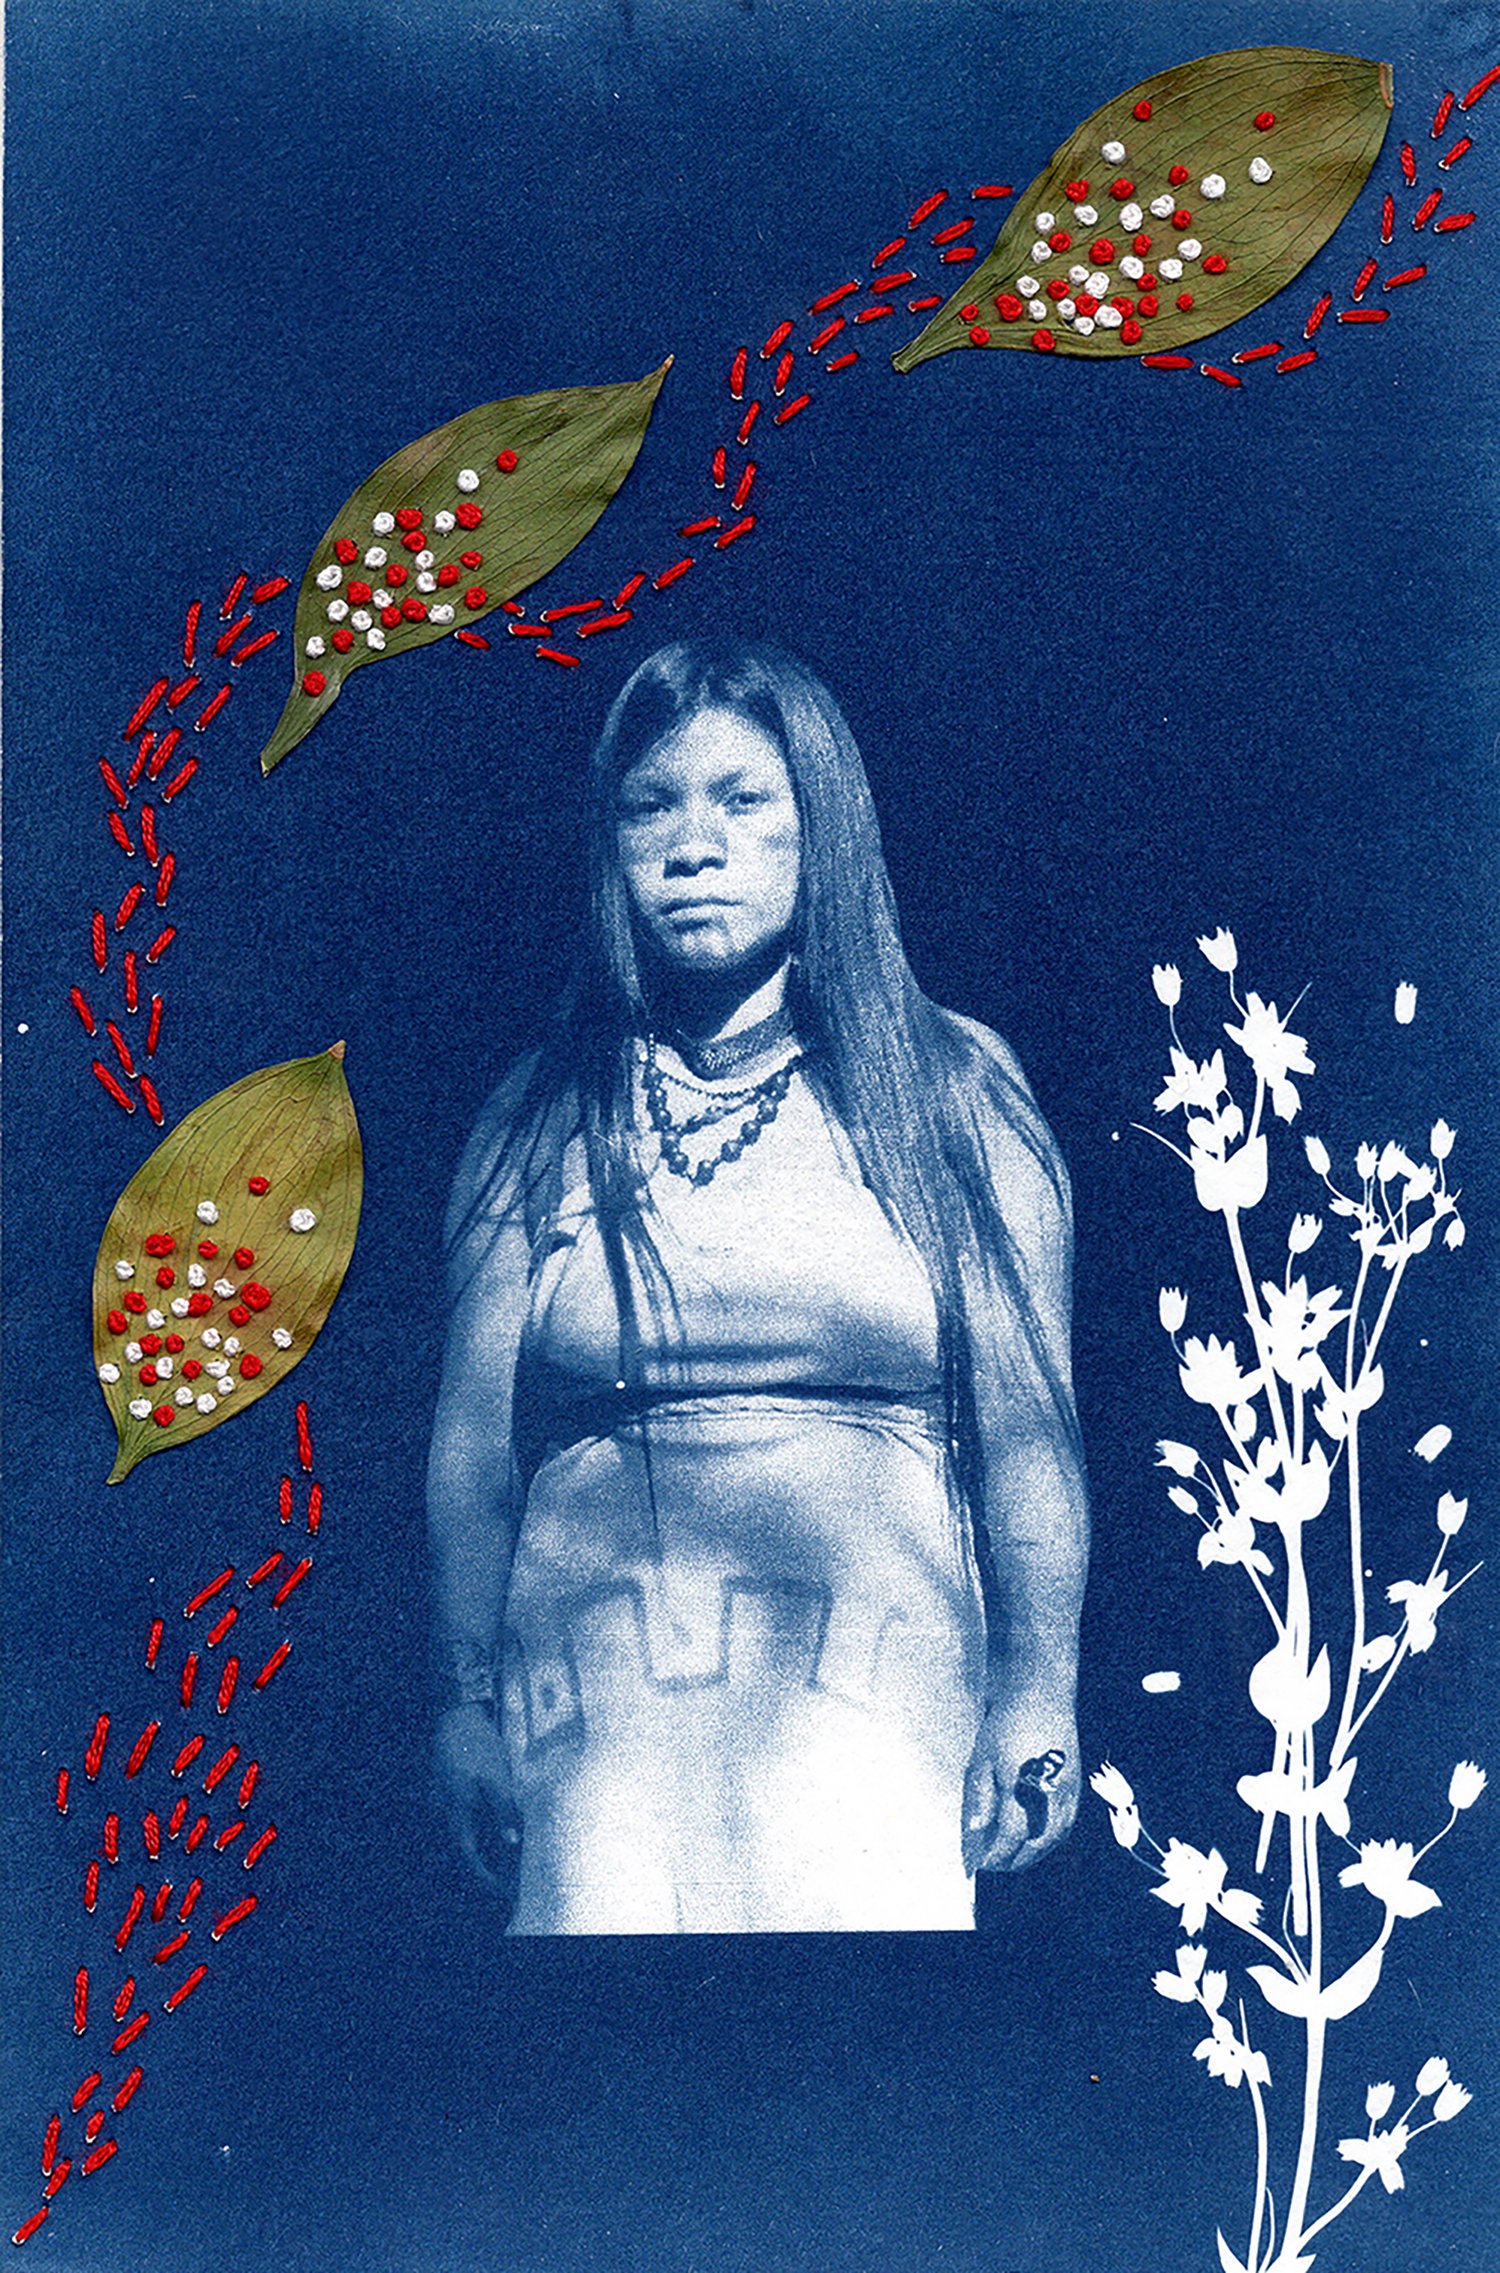  Cyanotype photography intervened with embroidery 